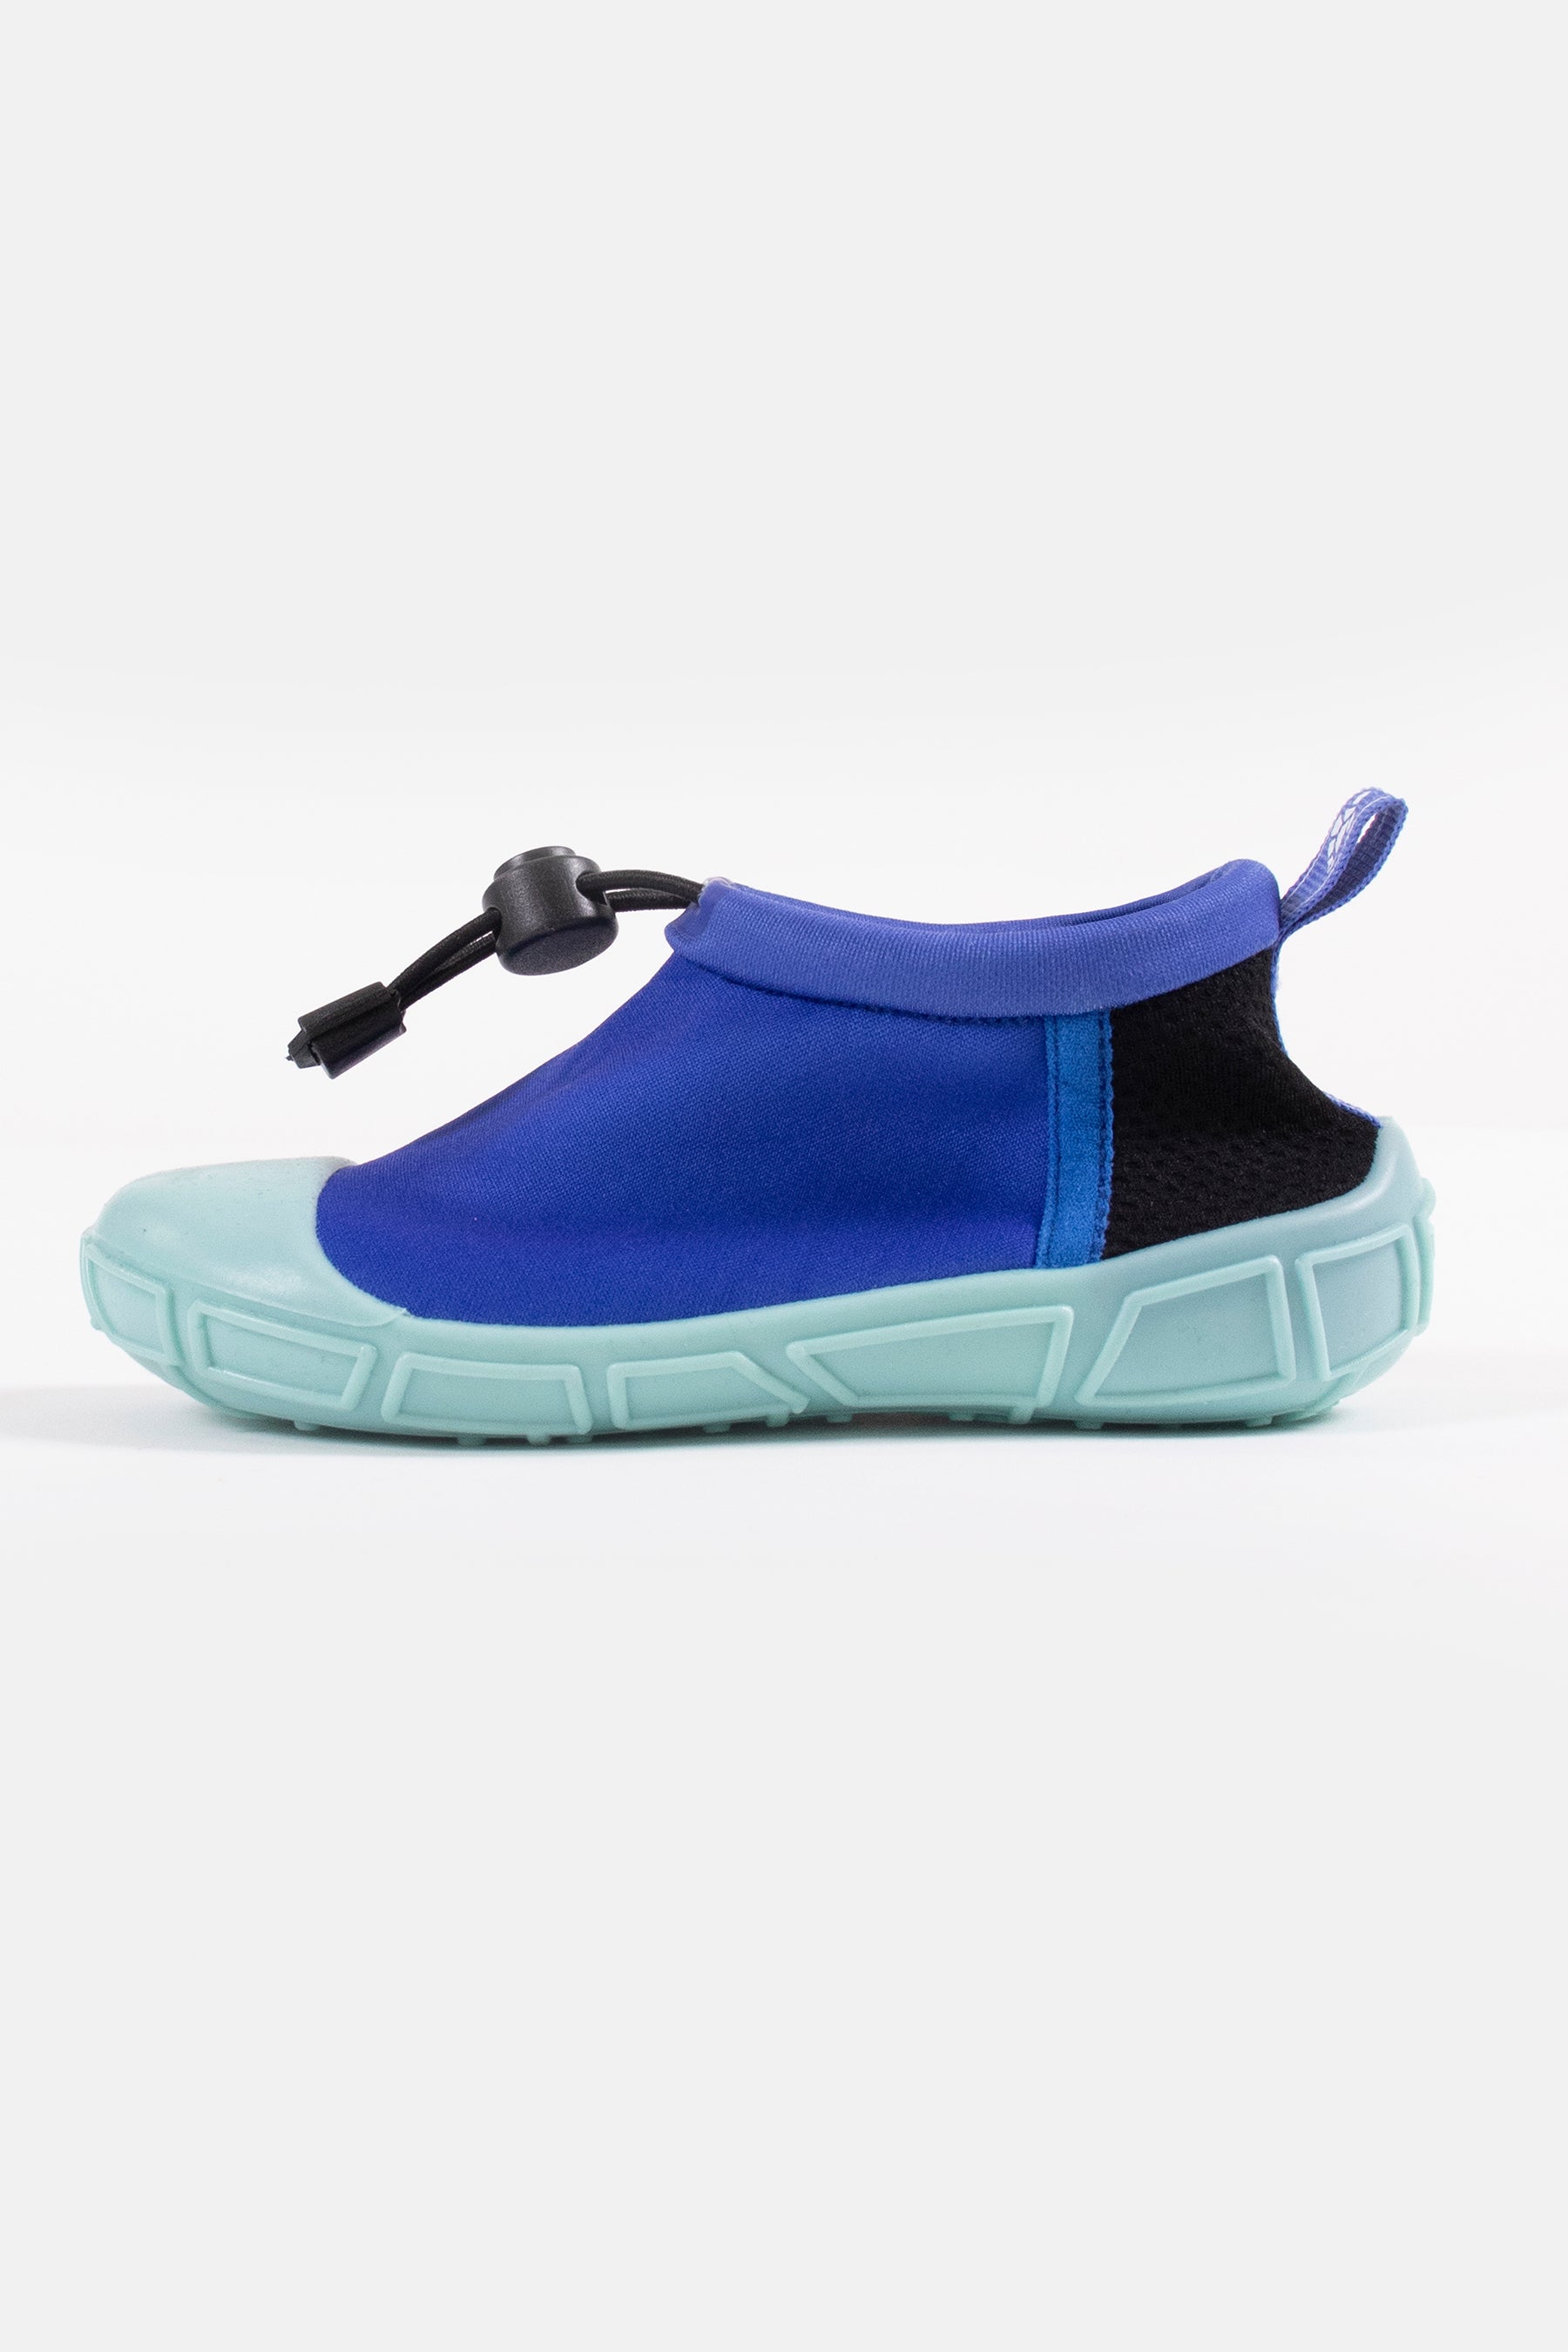 toggle aqua/water shoes in blue